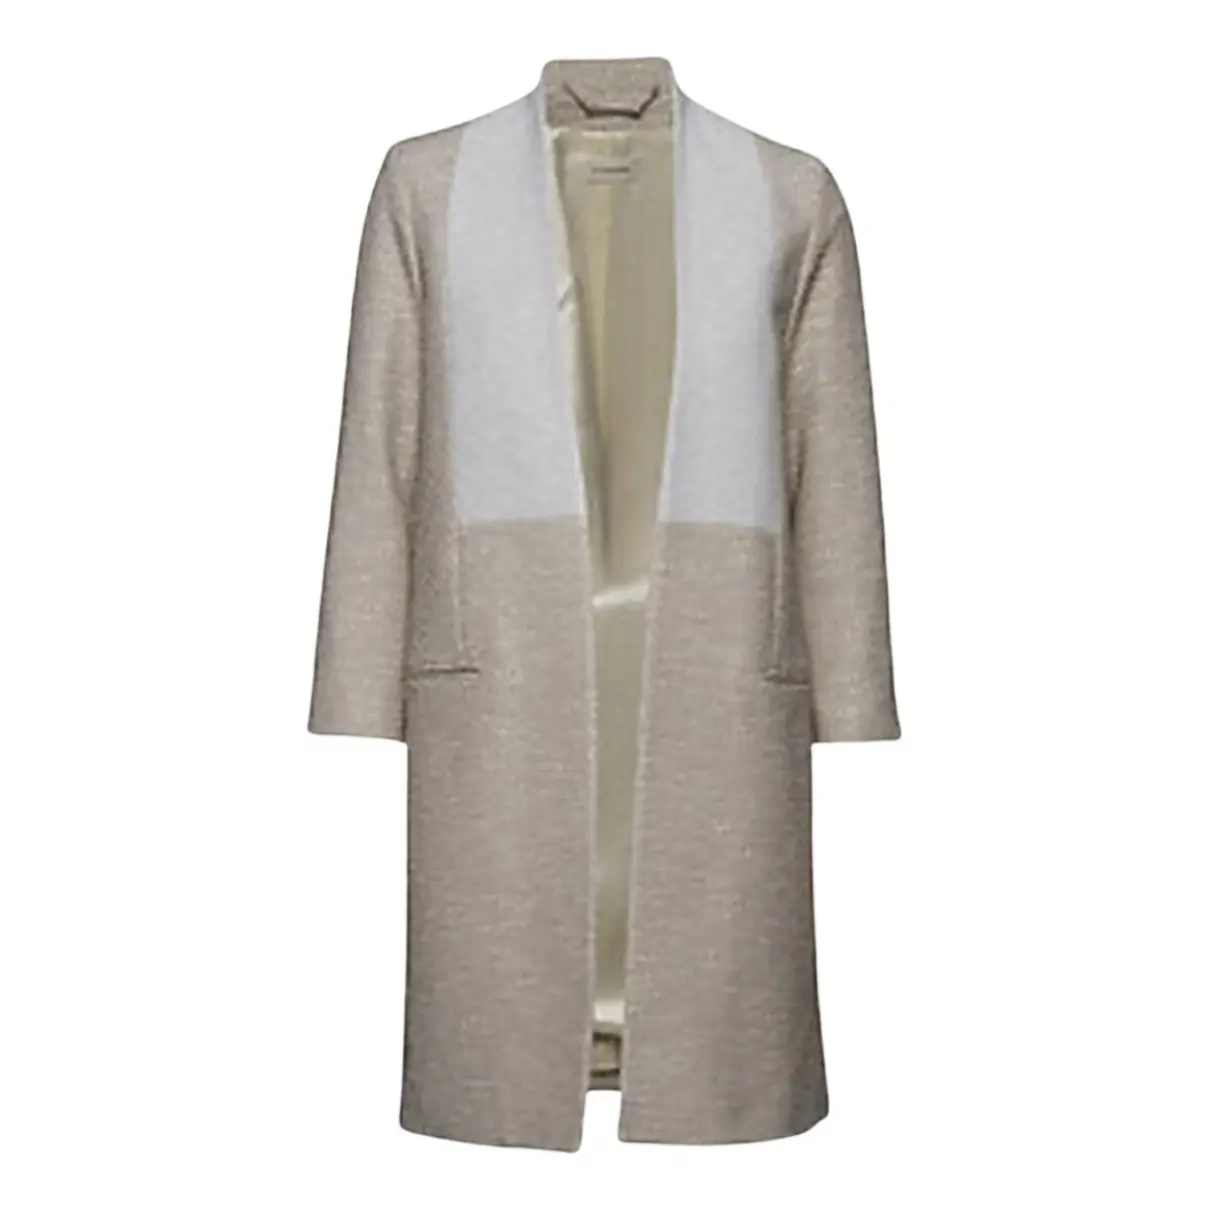 Trench coat by Malene Birger